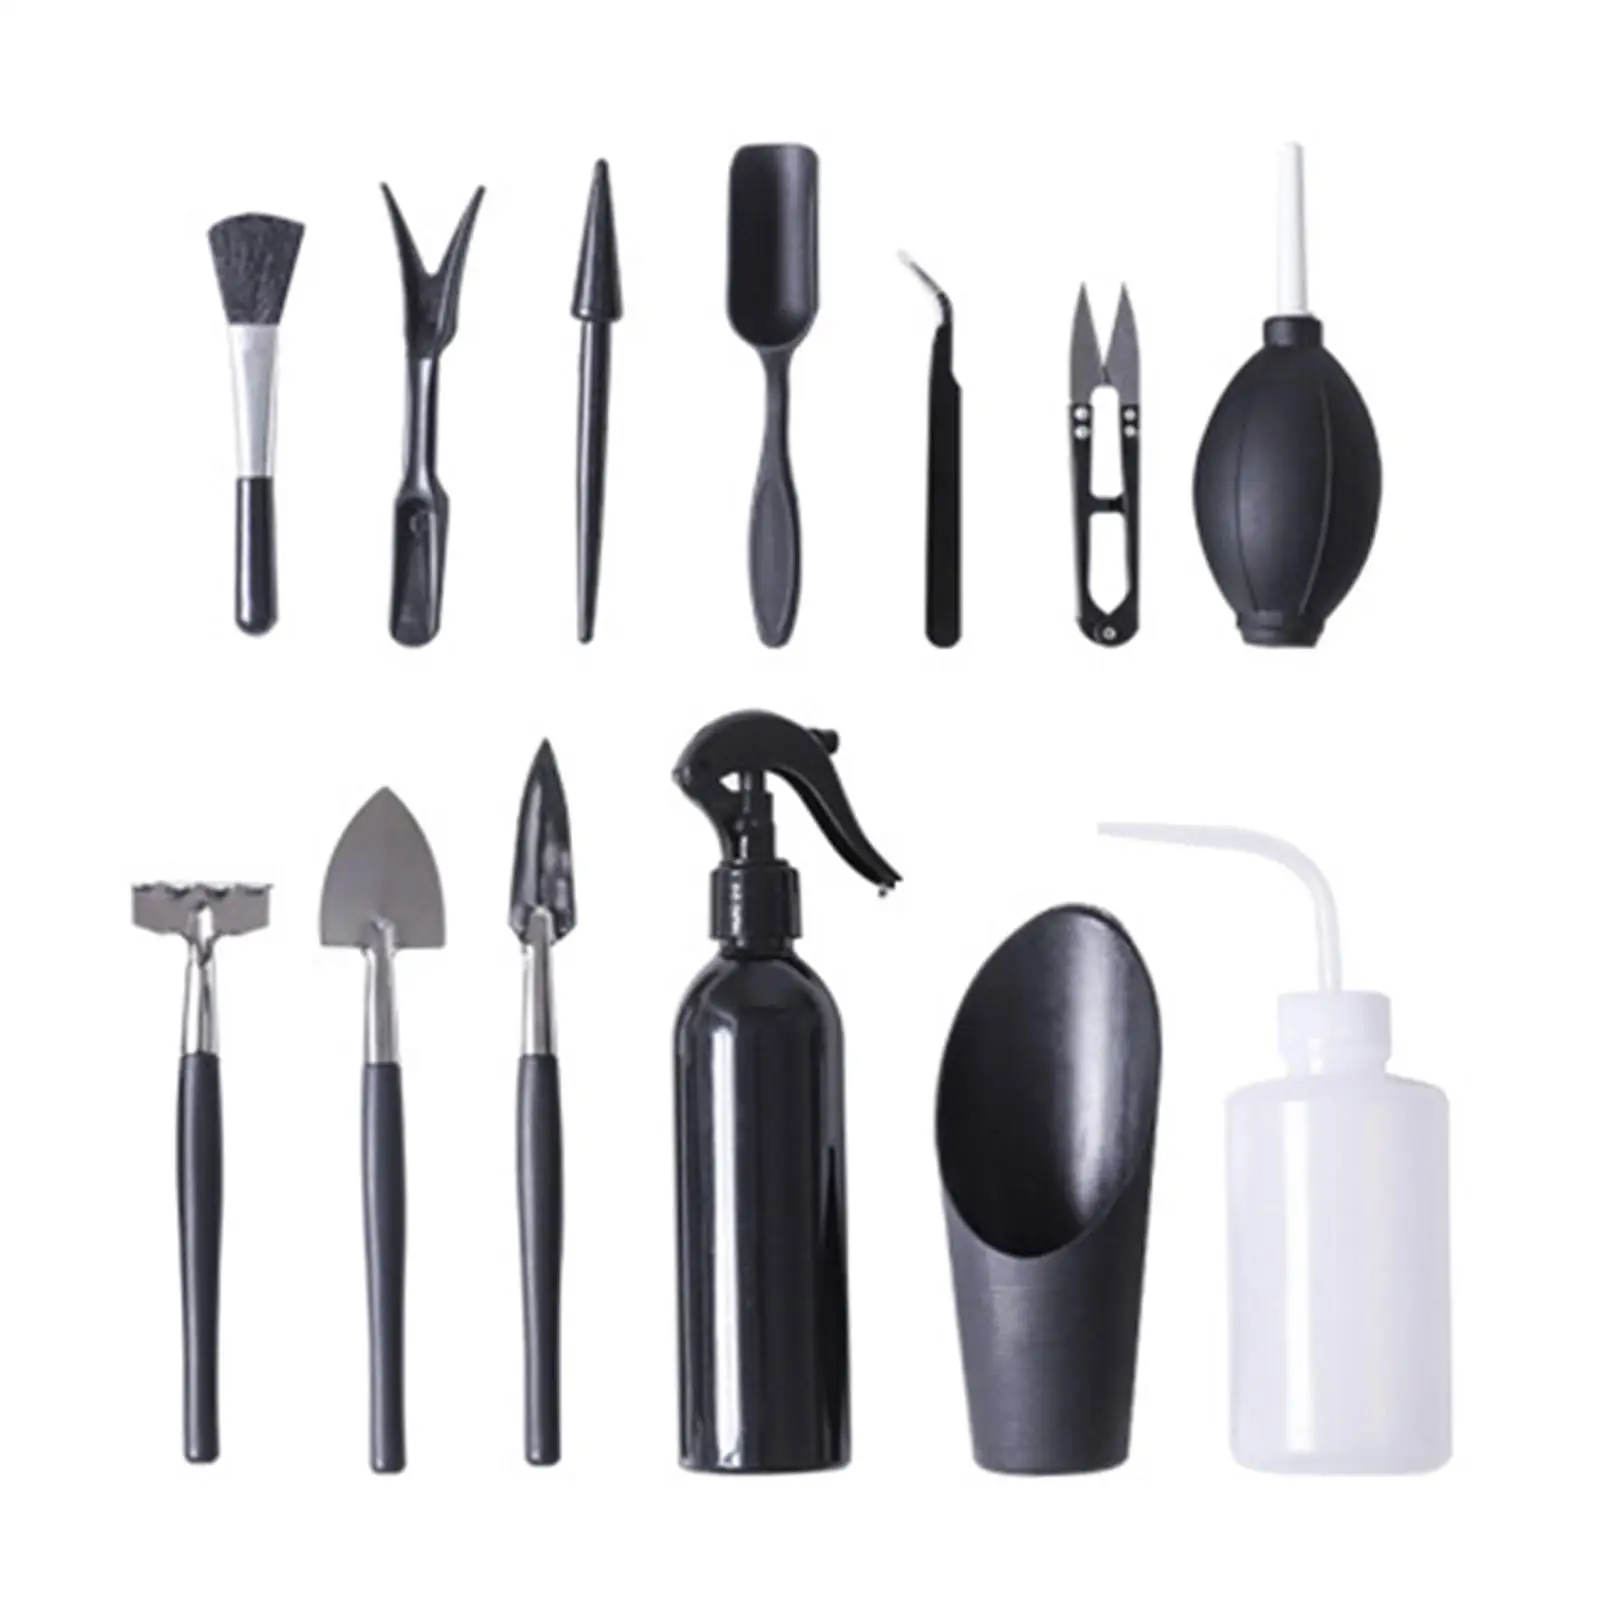 Succulent Hand Transplanting Tools Kit 13 Pieces ,Digging, Weeding, Aerating and Transplanting Muiti Functional Durable